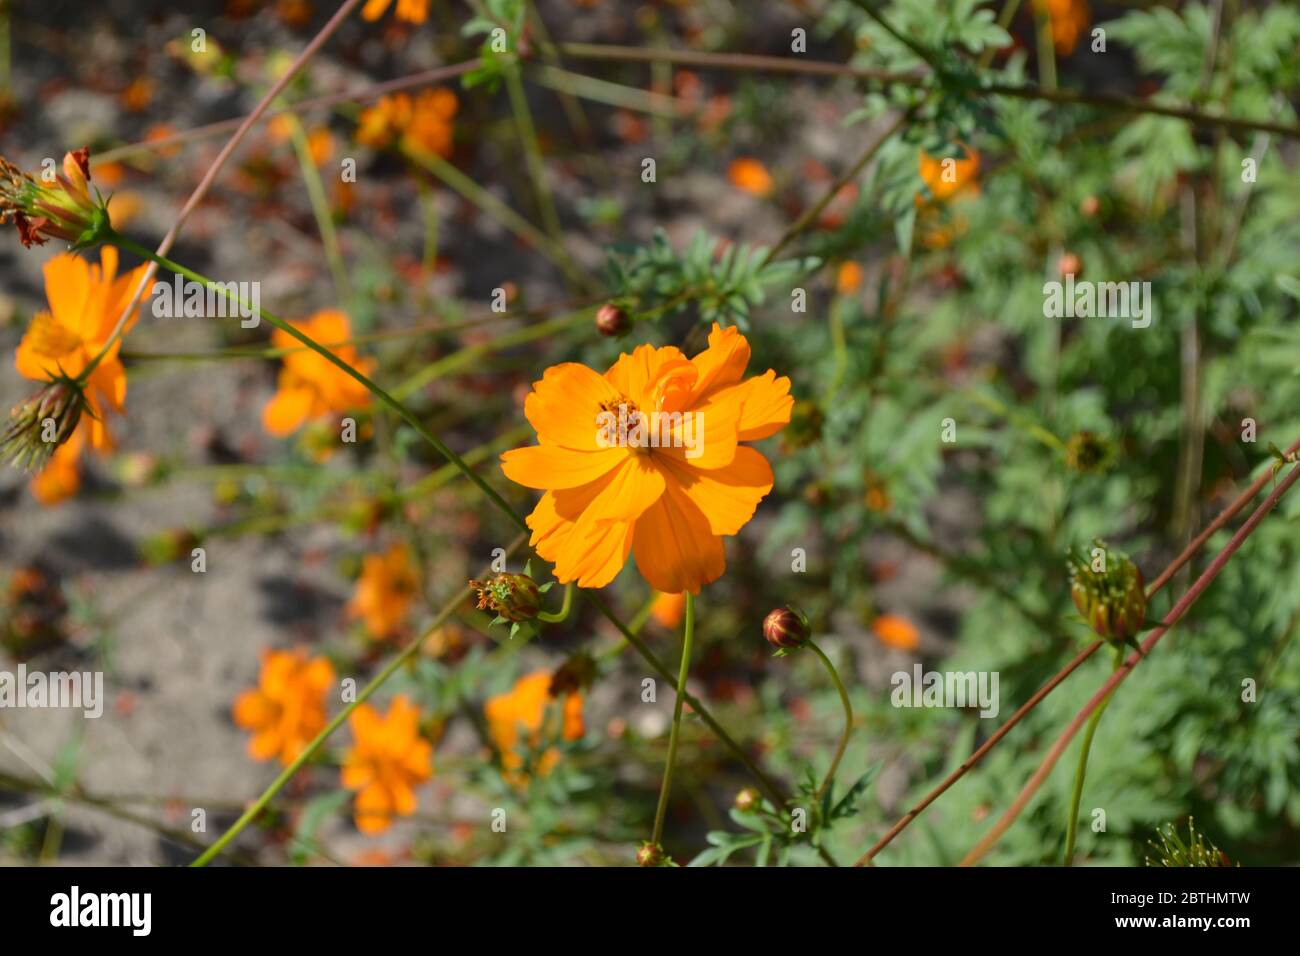 Flower bed, beautiful plants. Homemade plant, gardening. Cosmos, a genus of annual and perennial herbaceous plants of the family Asteraceae. Orange fl Stock Photo